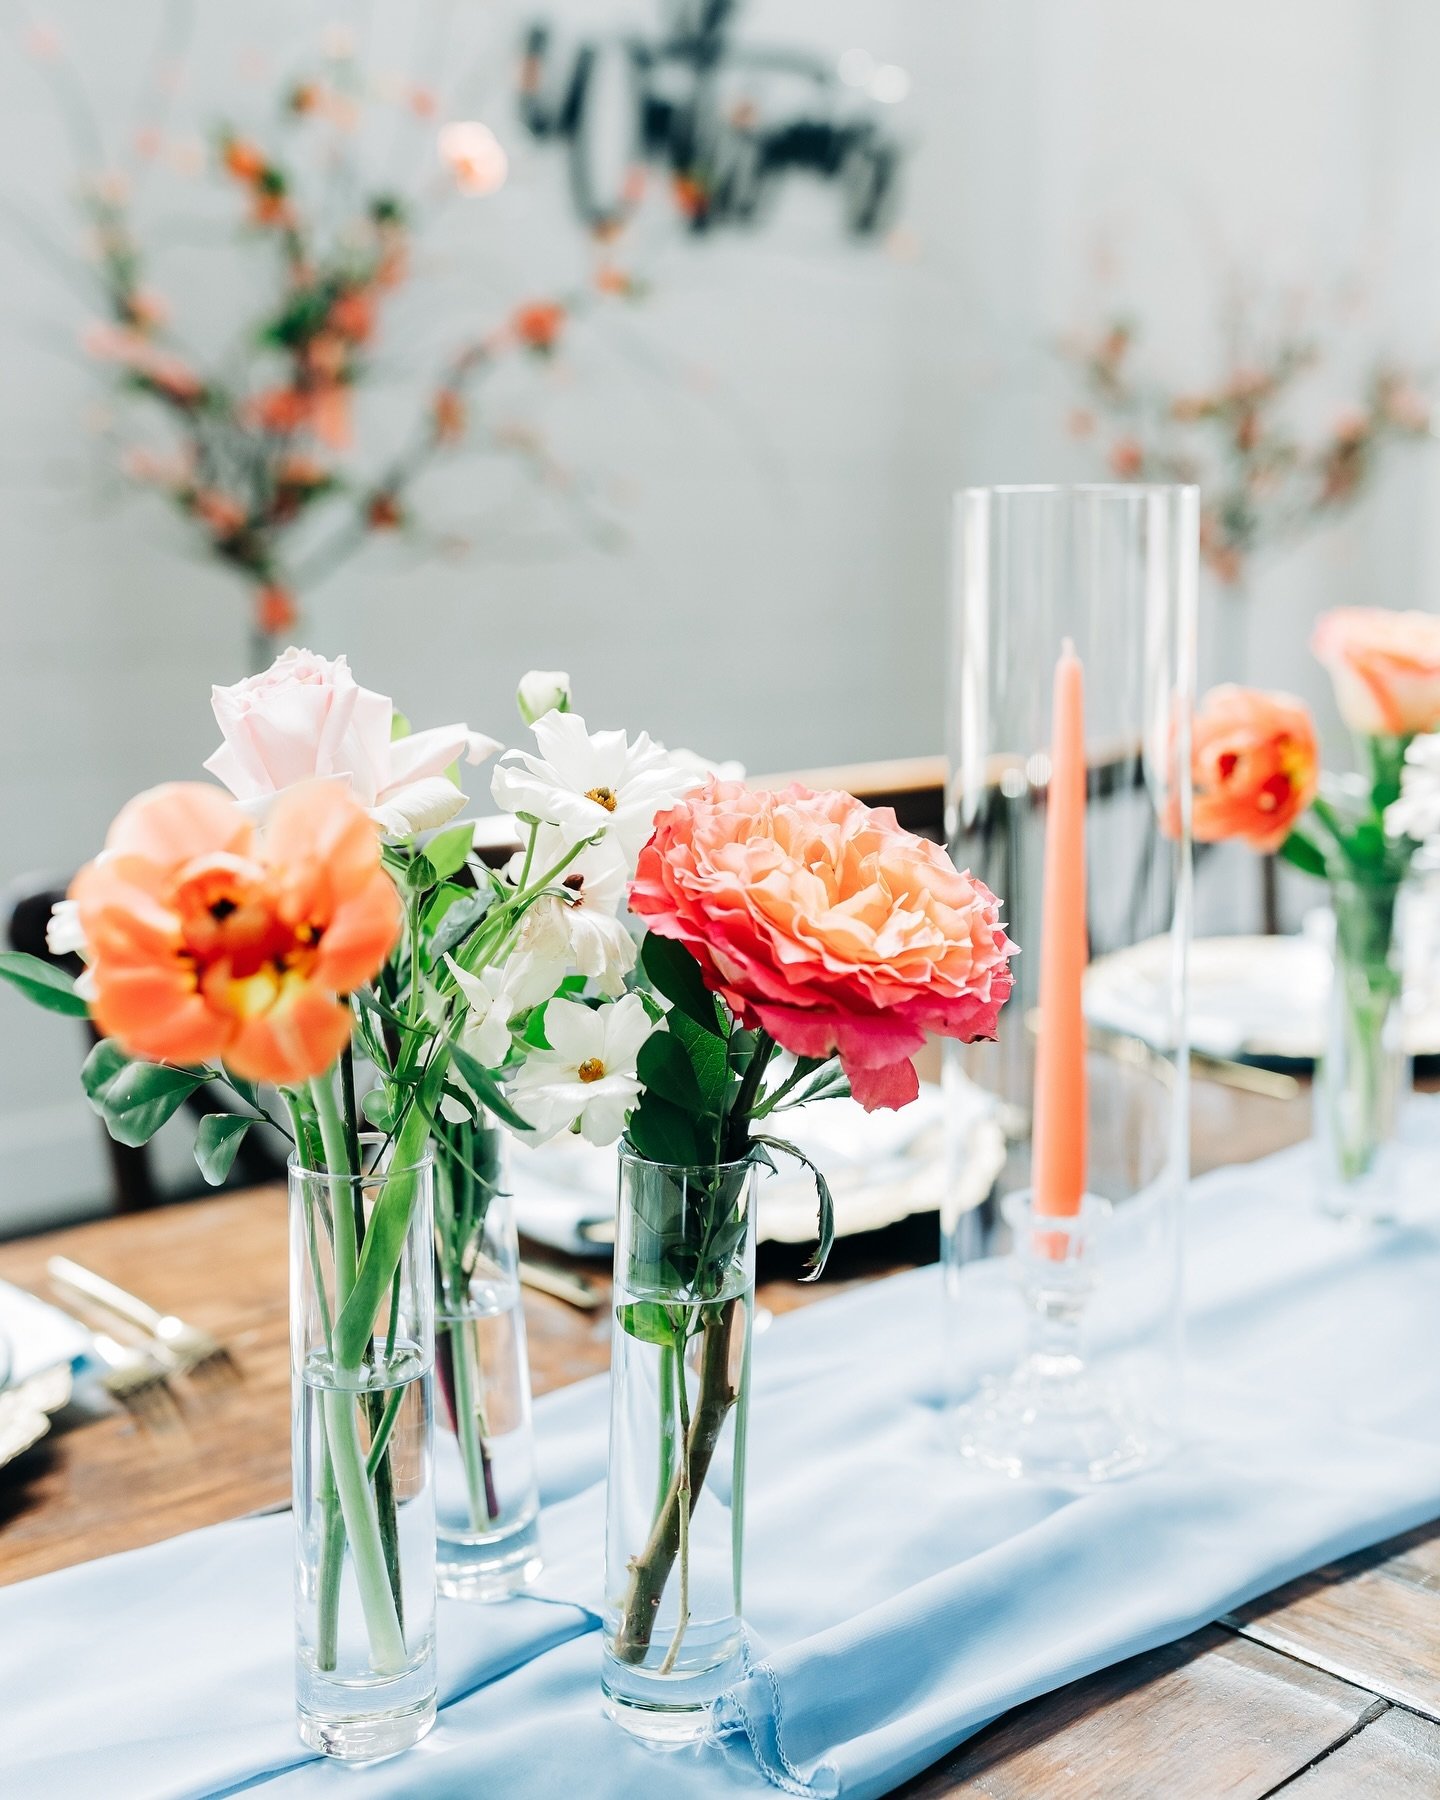 Happy Friday and wedding weekend to everyone tying the knot!!! ✨🧡🌈🌷

photography @studiollotus | venue @thebarnatwhiteoaks | rentals, florals and coordinating @celebrationseventsandtents